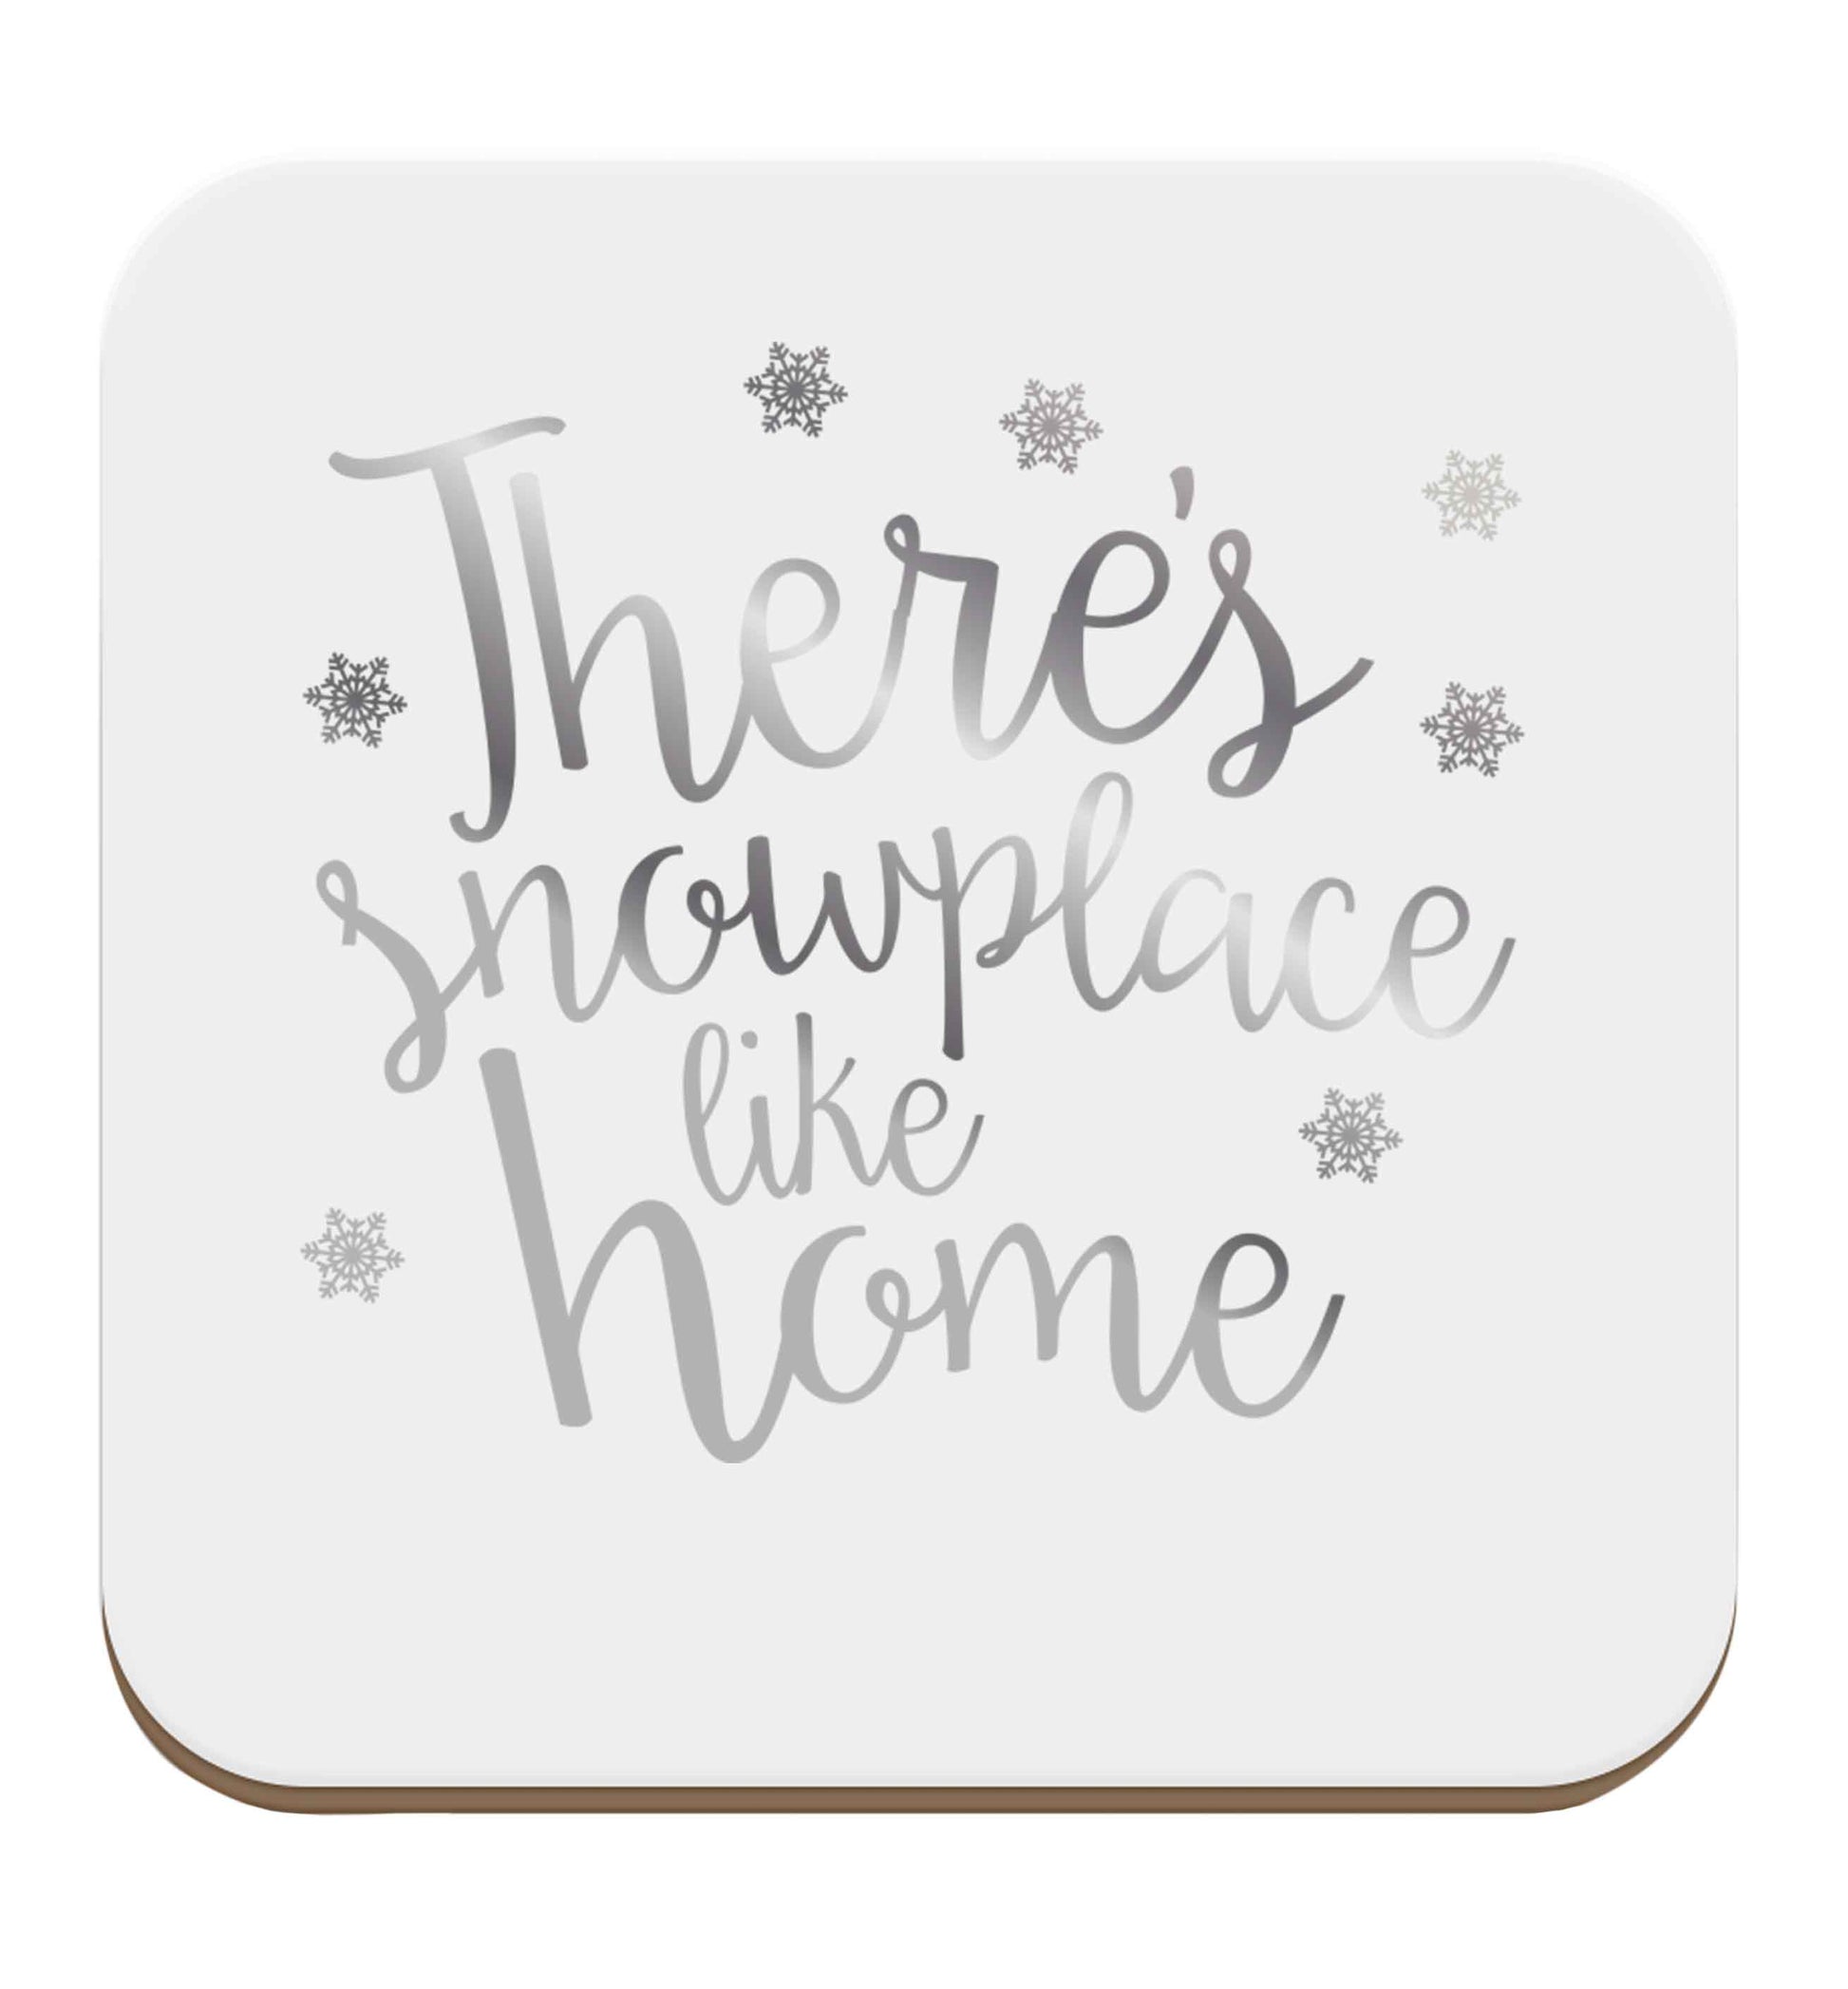 There's snowplace like home - metallic silver set of four coasters